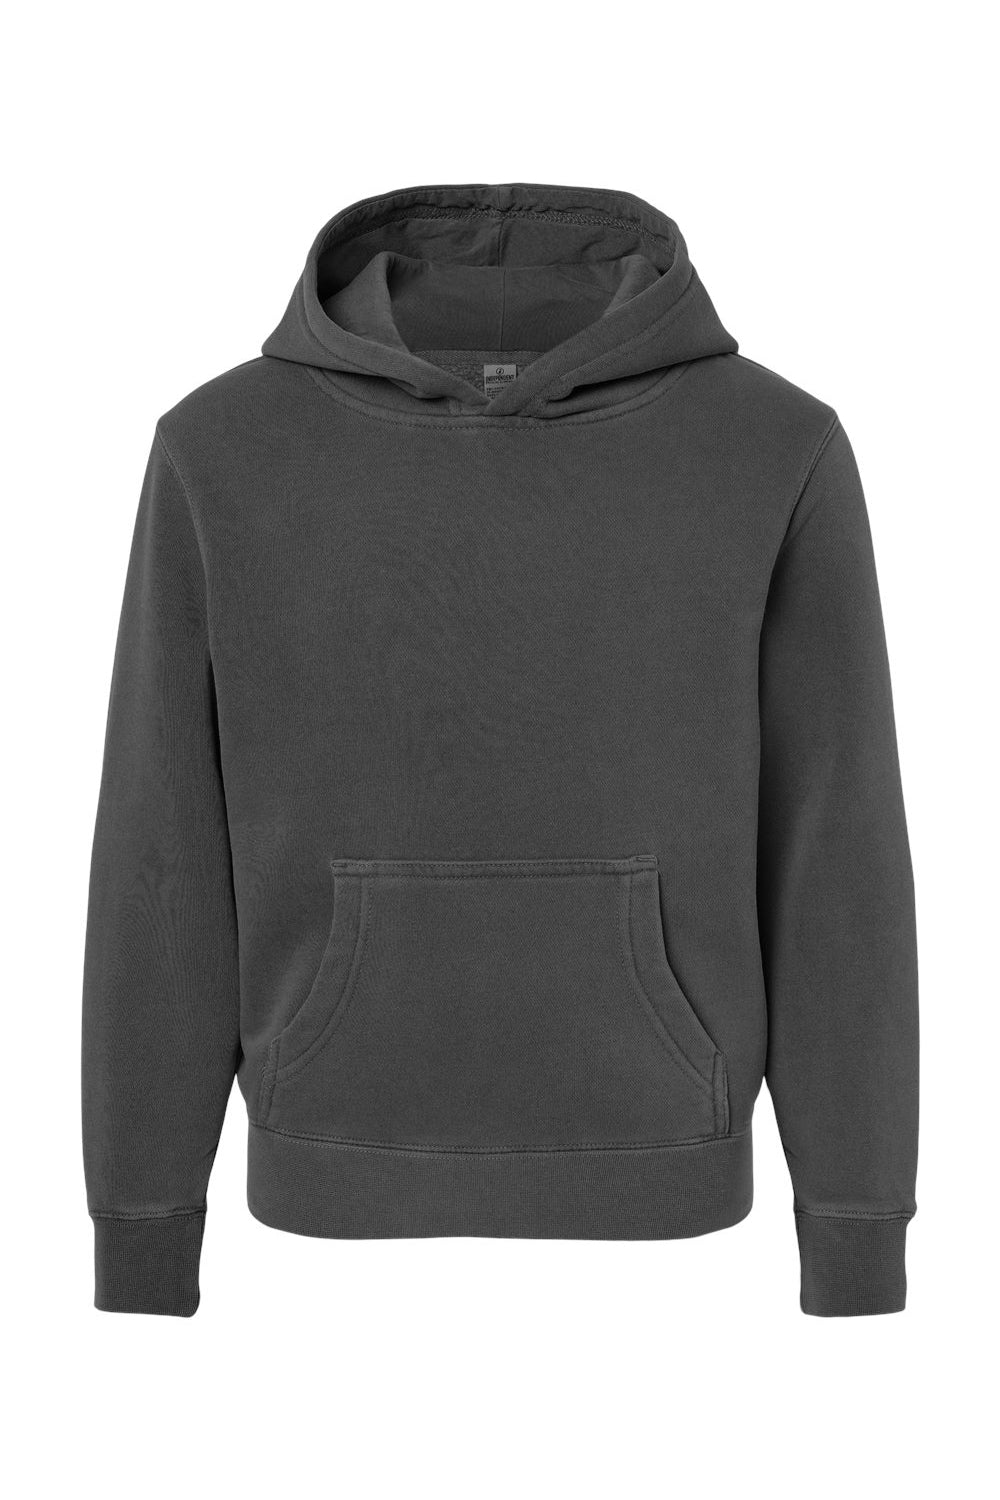 Independent Trading Co. PRM1500Y Youth Pigment Dyed Hooded Sweatshirt Hoodie Black Flat Front